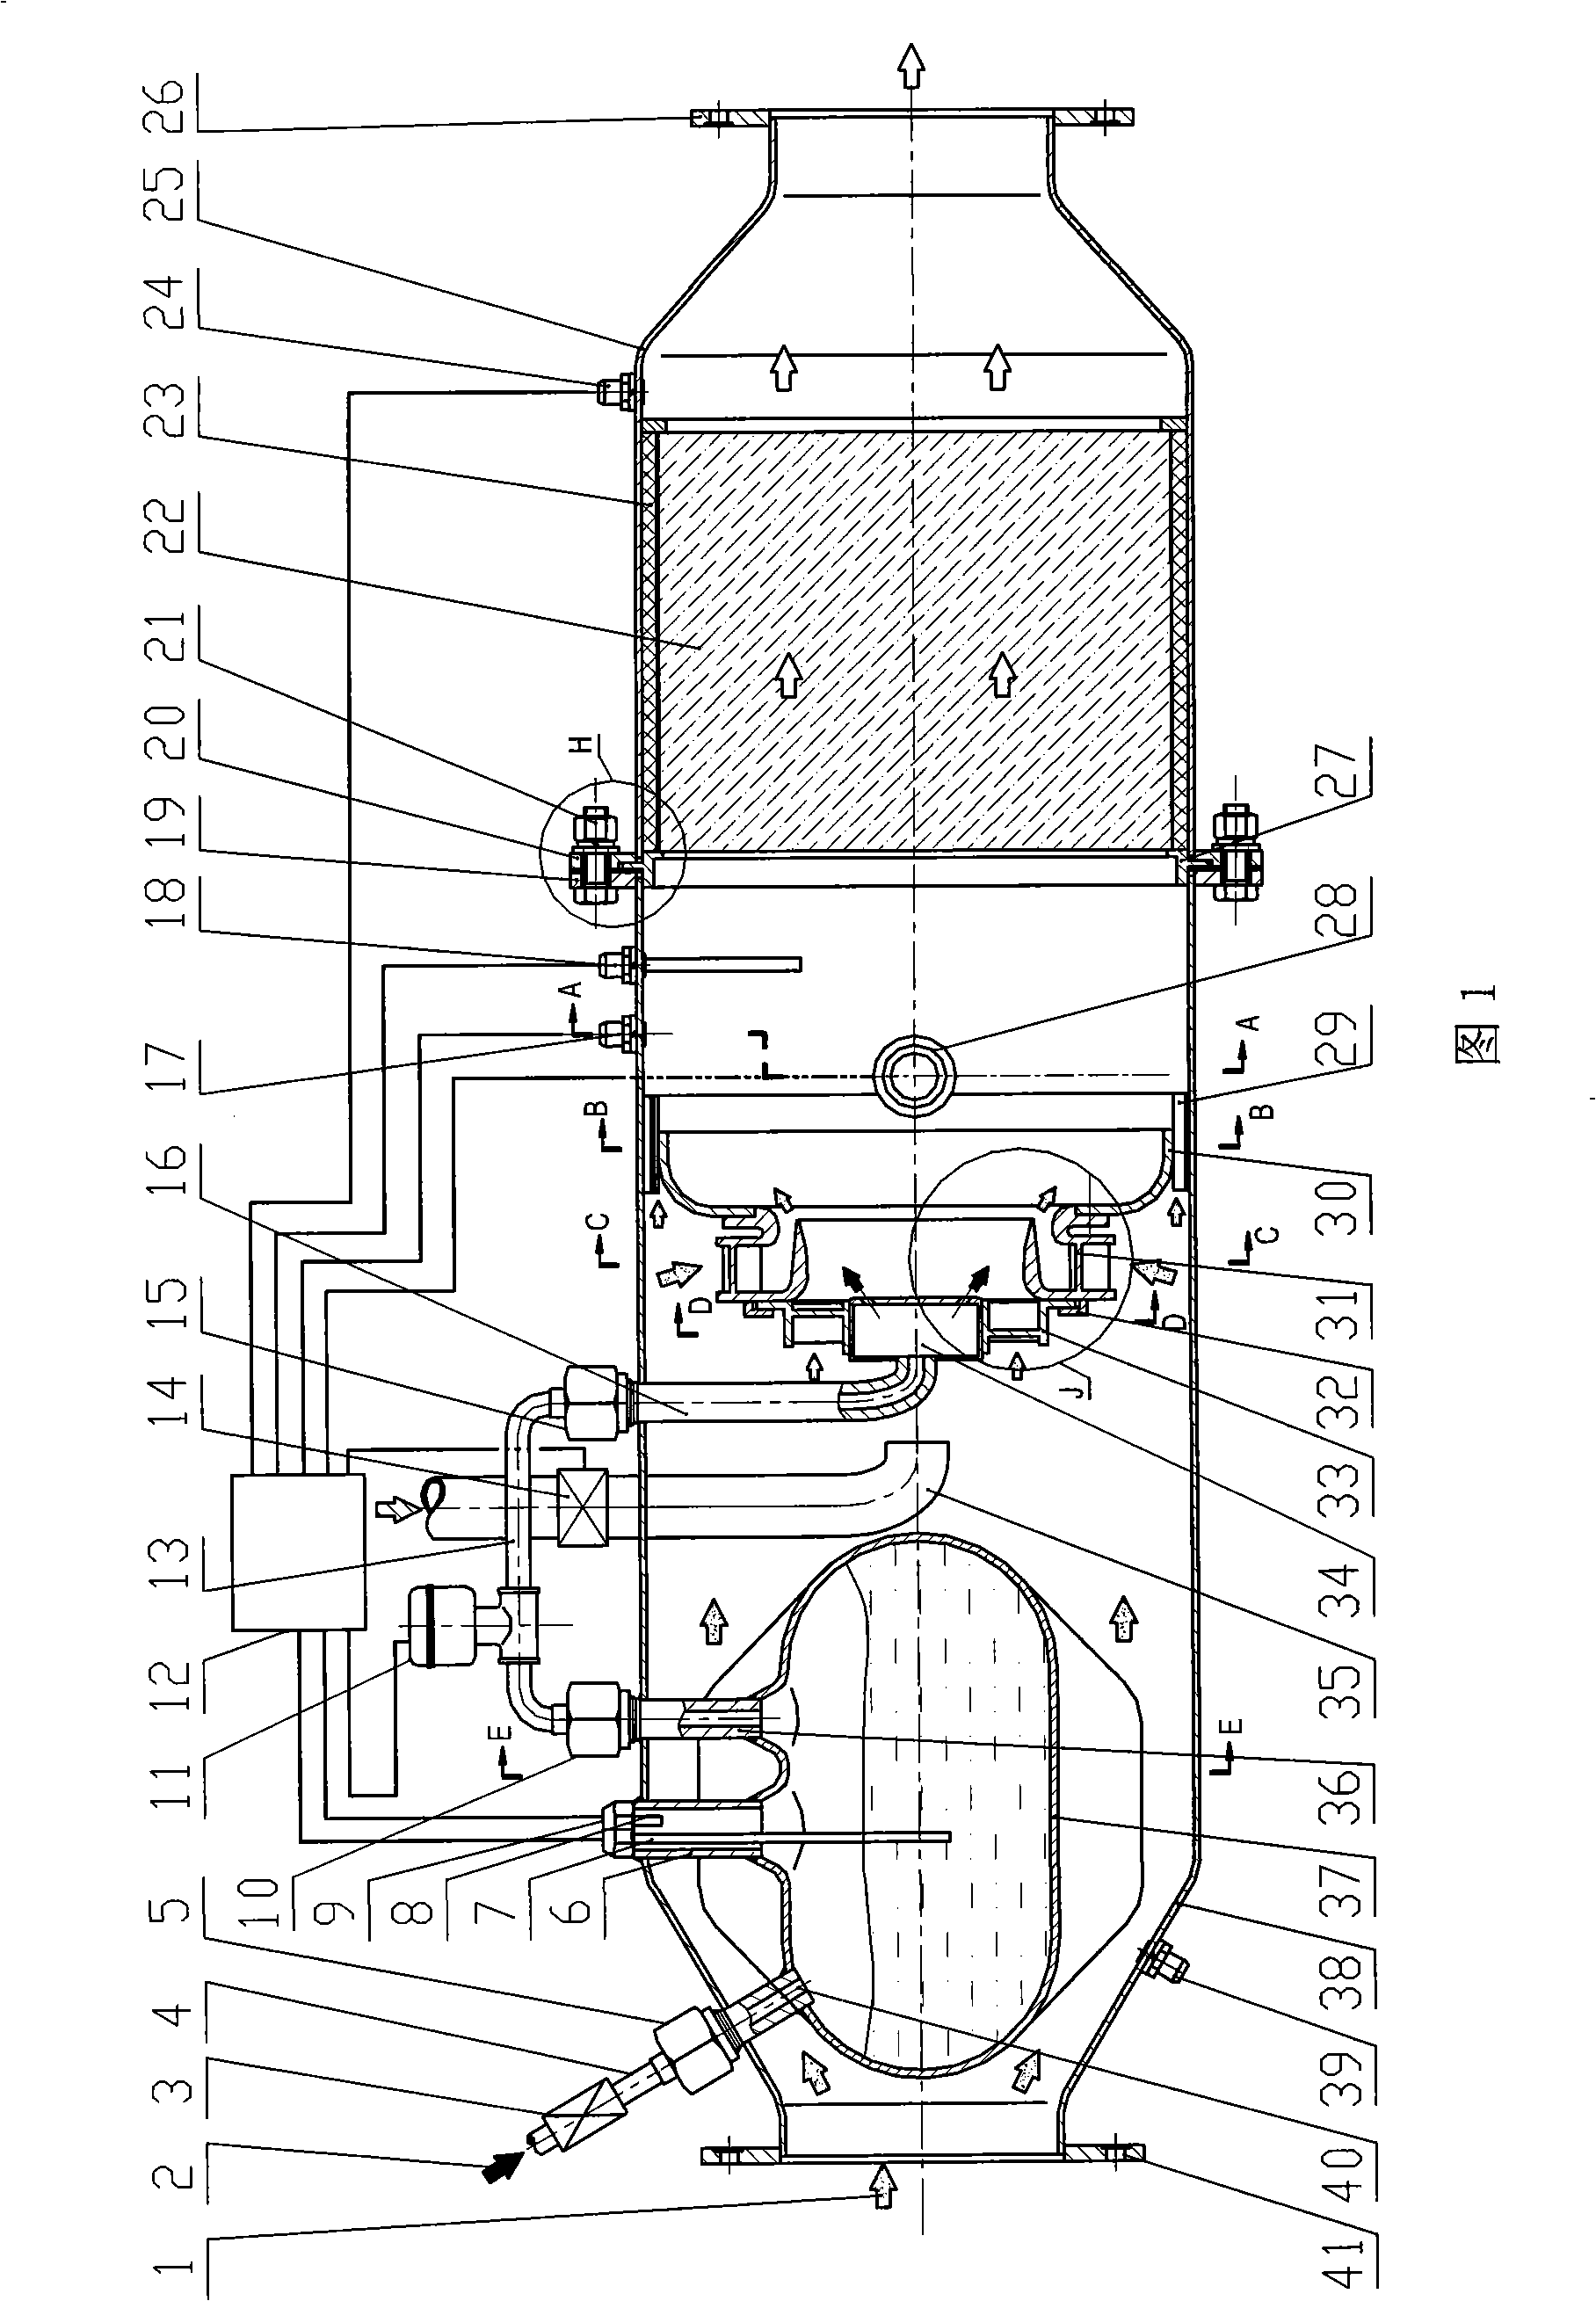 Active heat reclaiming method and device for diesel engine particulate drip catcher